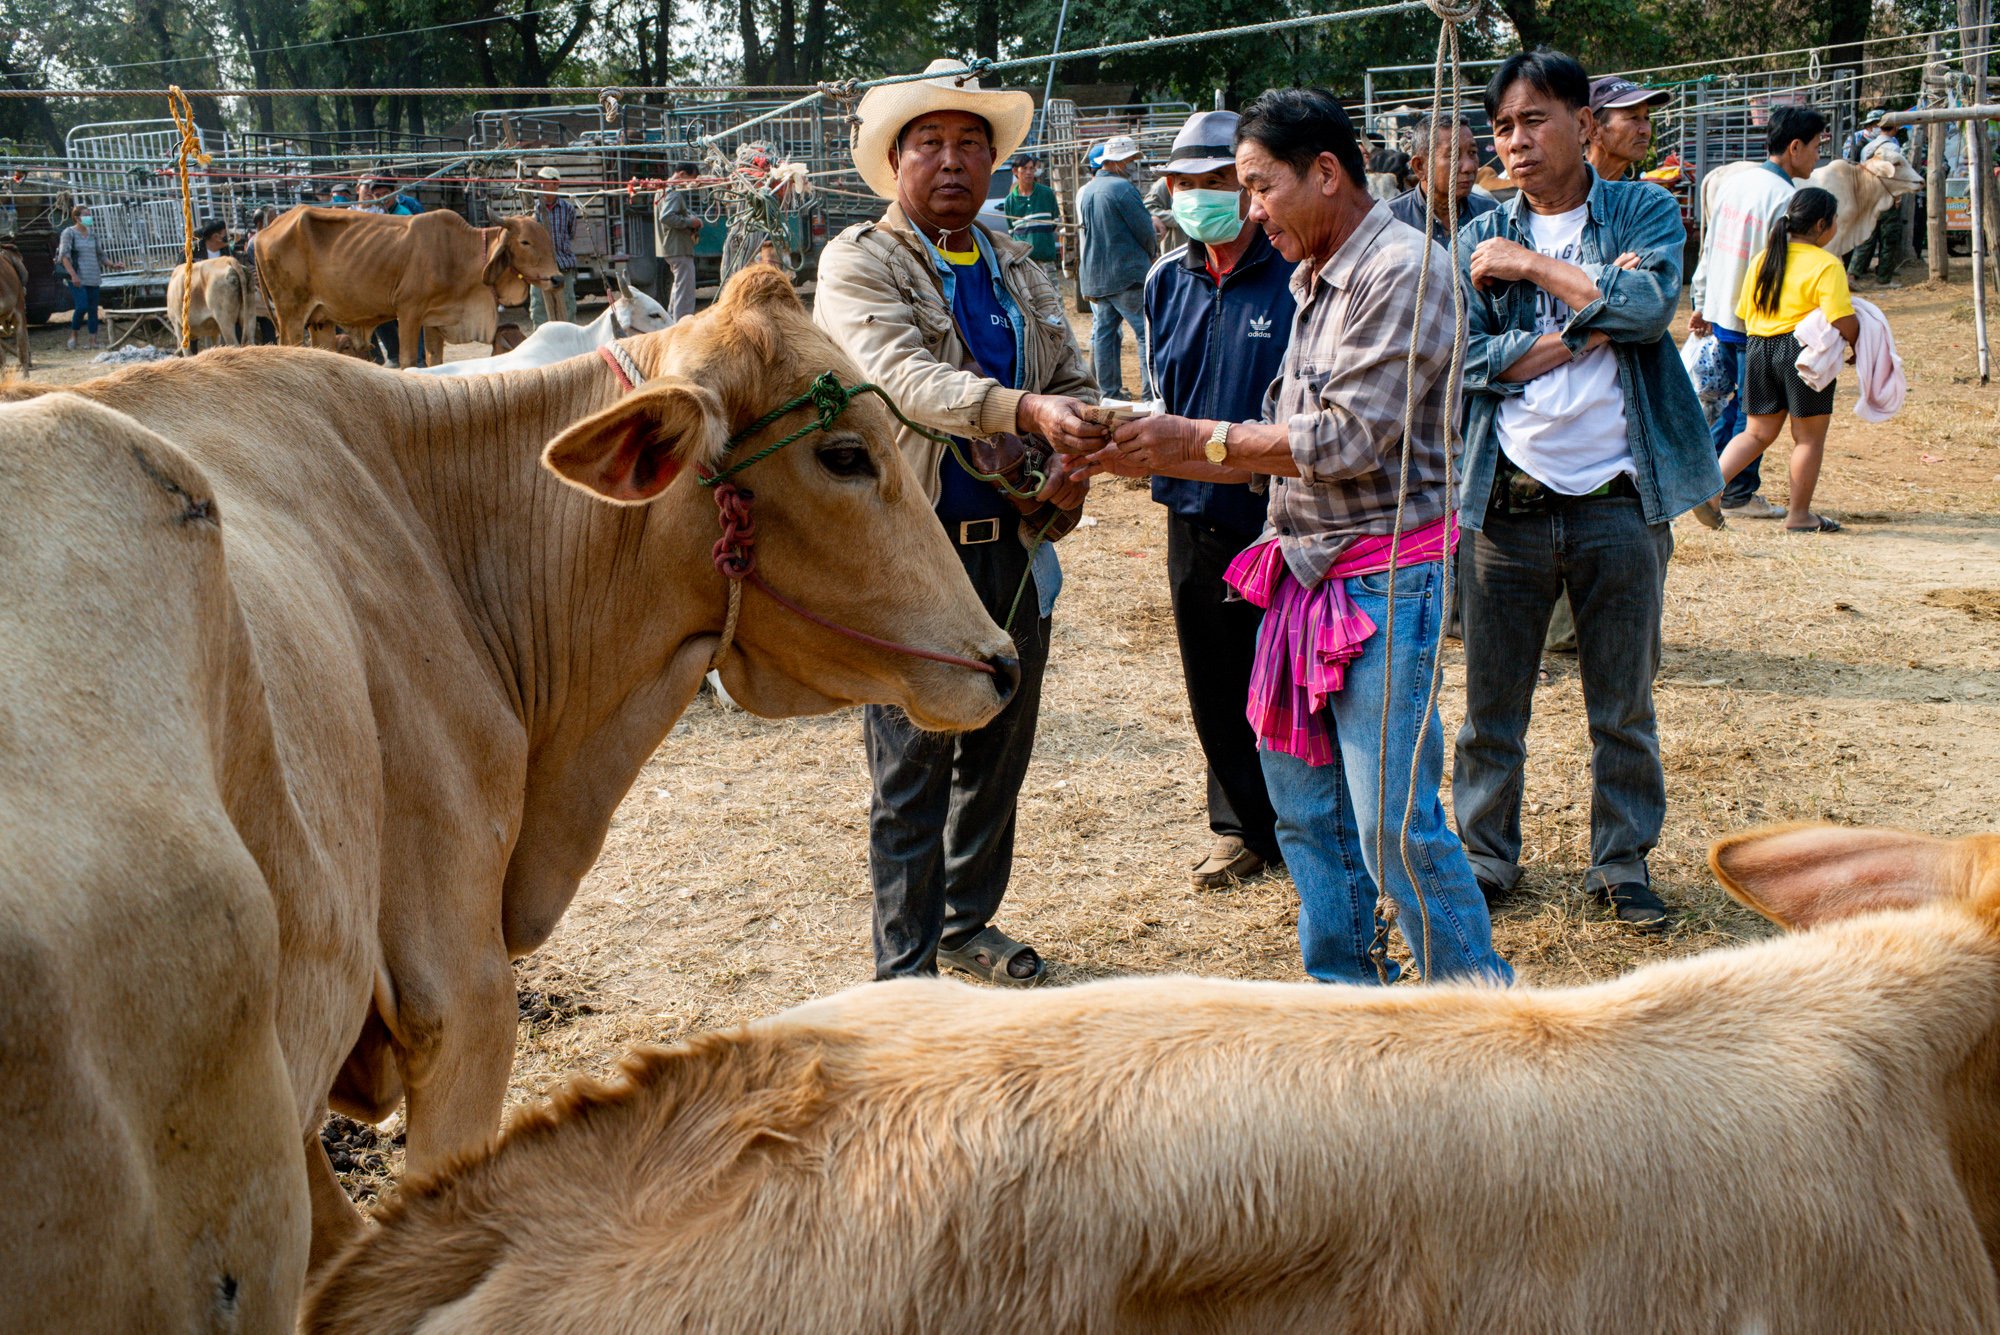 Farmers exchange money at the cattle market after striking a deal. Make photo essays